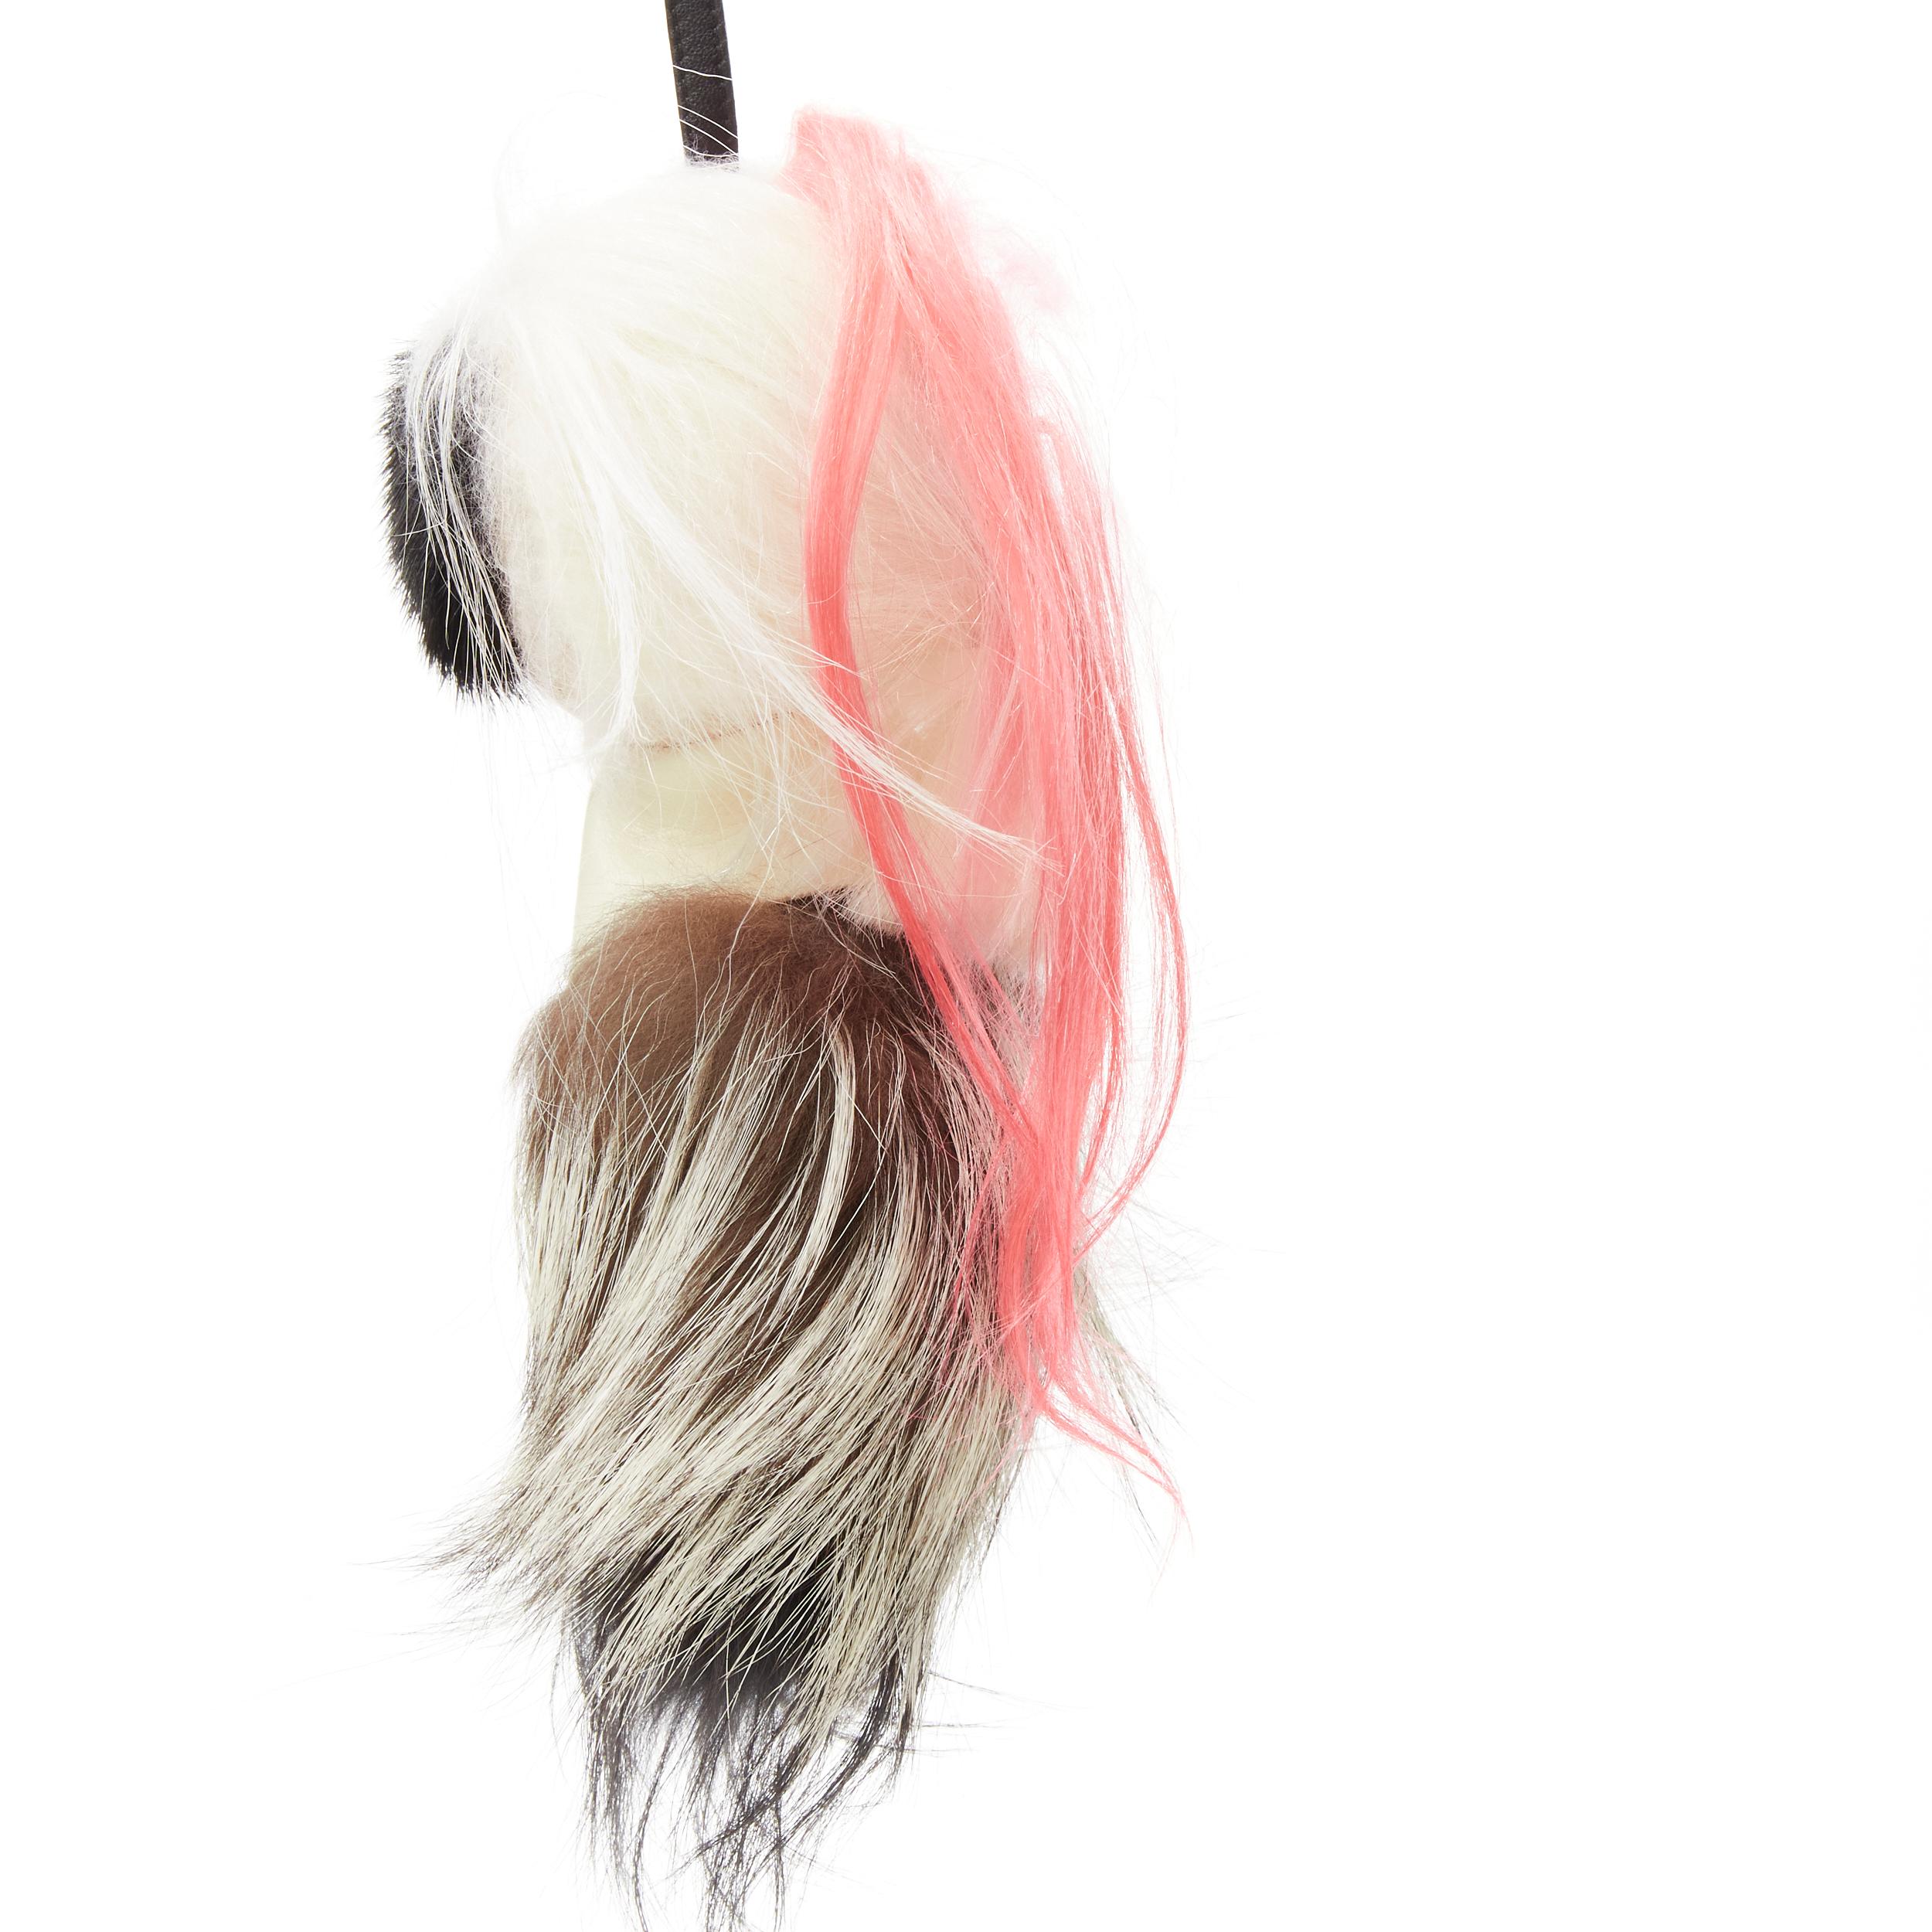 rare FENDI Karlito 2014 Large limited pink mink fox fur bag charm keyring 
Reference: ANWU/A00147 
Brand: Fendi 
Designer: Karl Lagerfeld 
Collection: Karlito 2014 Runway 
Material: Fur 
Color: Multi 
Pattern: Solid 
Extra Detail: Extremely rare and